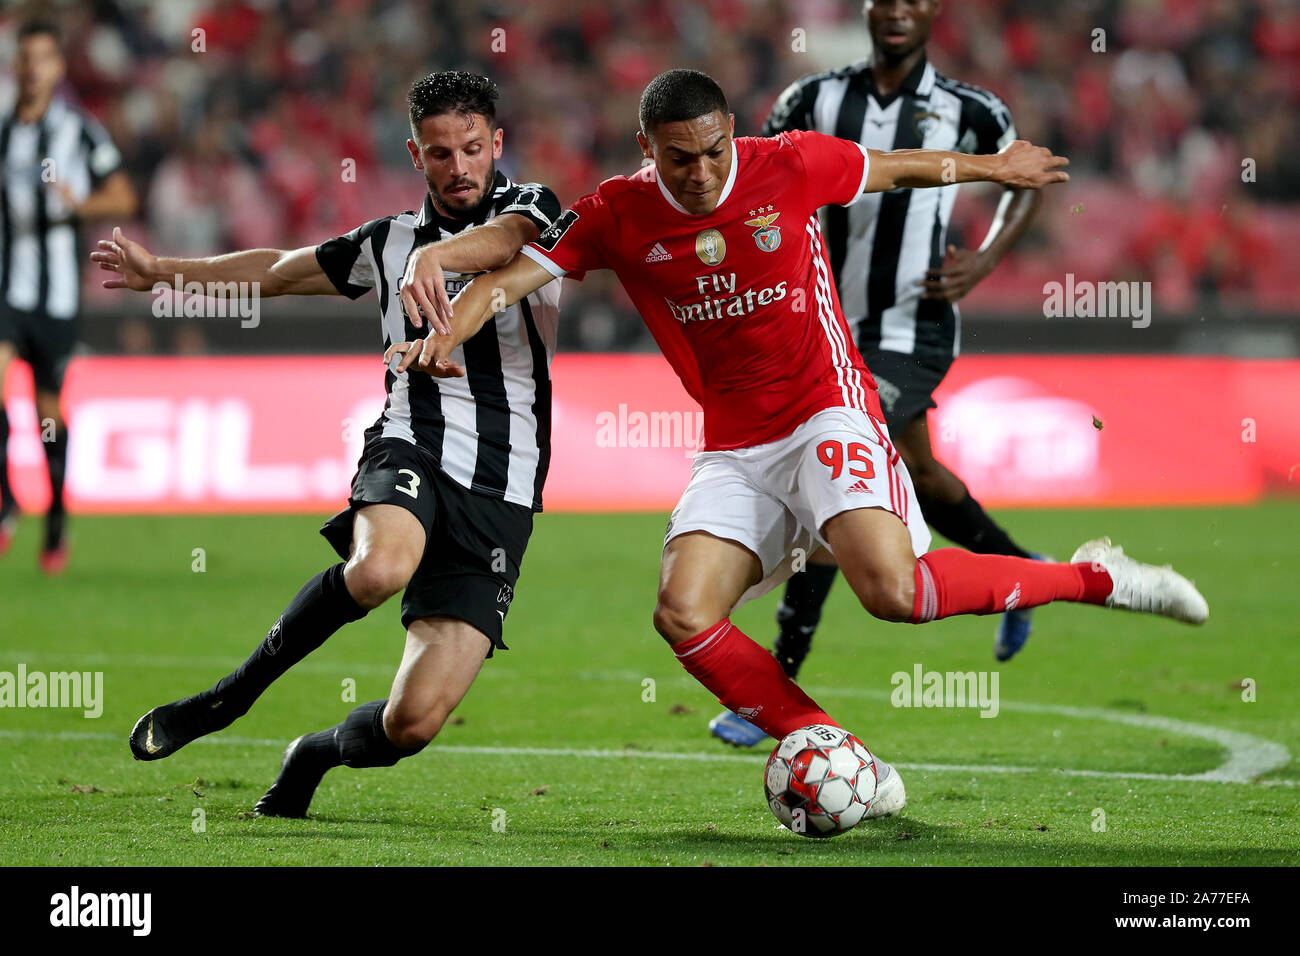 Lisbon, Portugal. 30th Oct, 2019. Carlos Vinicius (R) of Benfica vies with Lucas Possignolo of Portimonense during their Portuguese League football match at the Luz stadium in Lisbon, Portugal, on Oct. 30, 2019. Credit: Pedro Fiuza/Xinhua/Alamy Live News Stock Photo